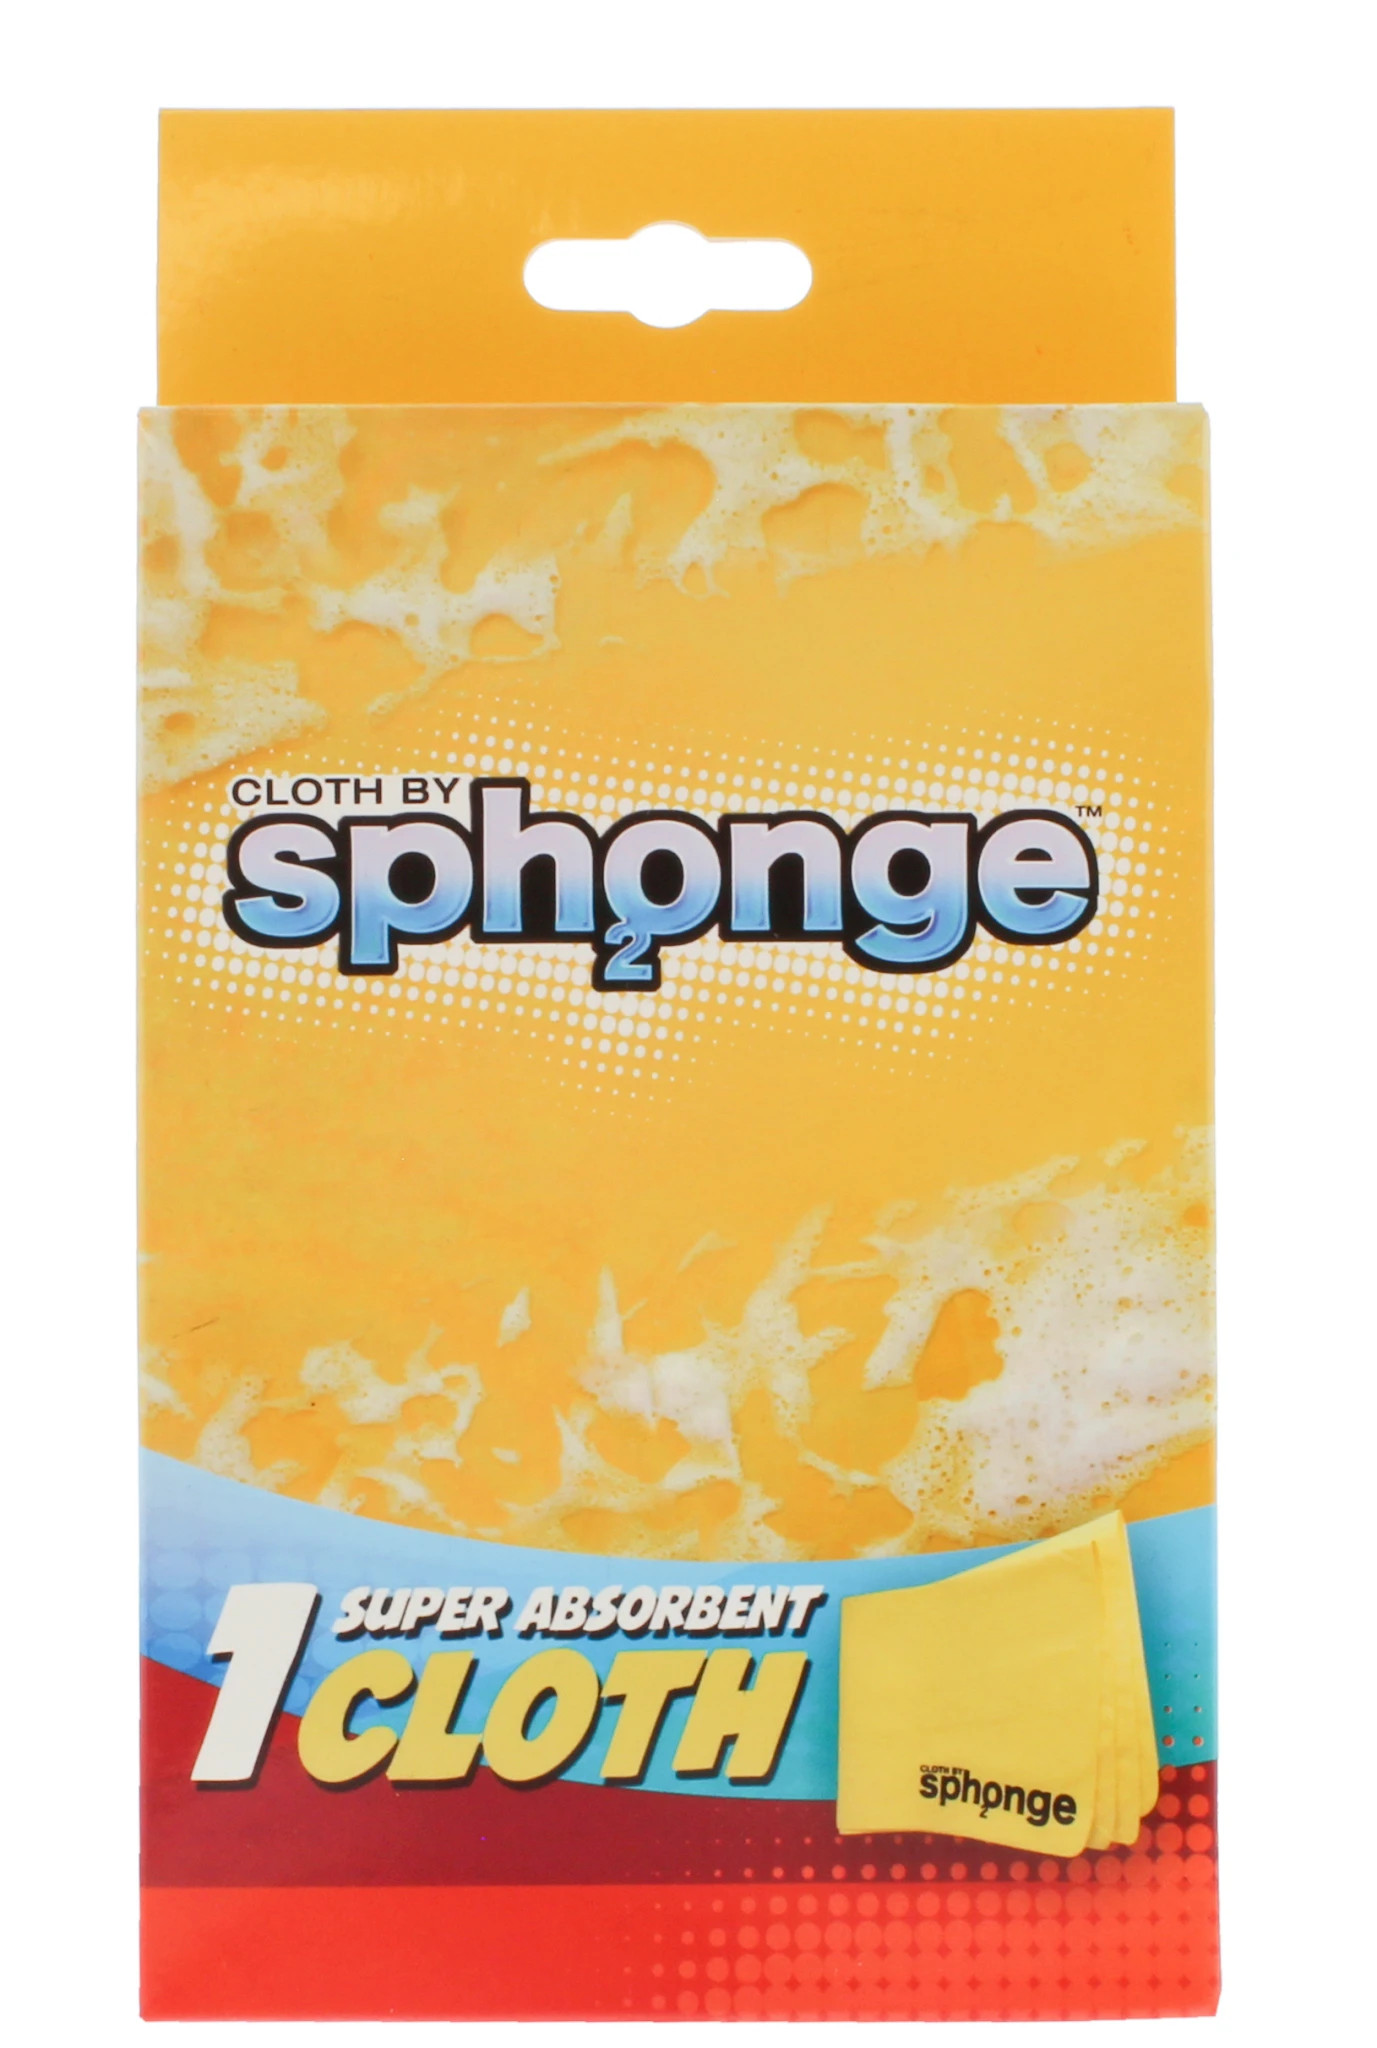 SPOUNGE SPH2ONGE SUPER ABSORBENT CLOTH YELLOW